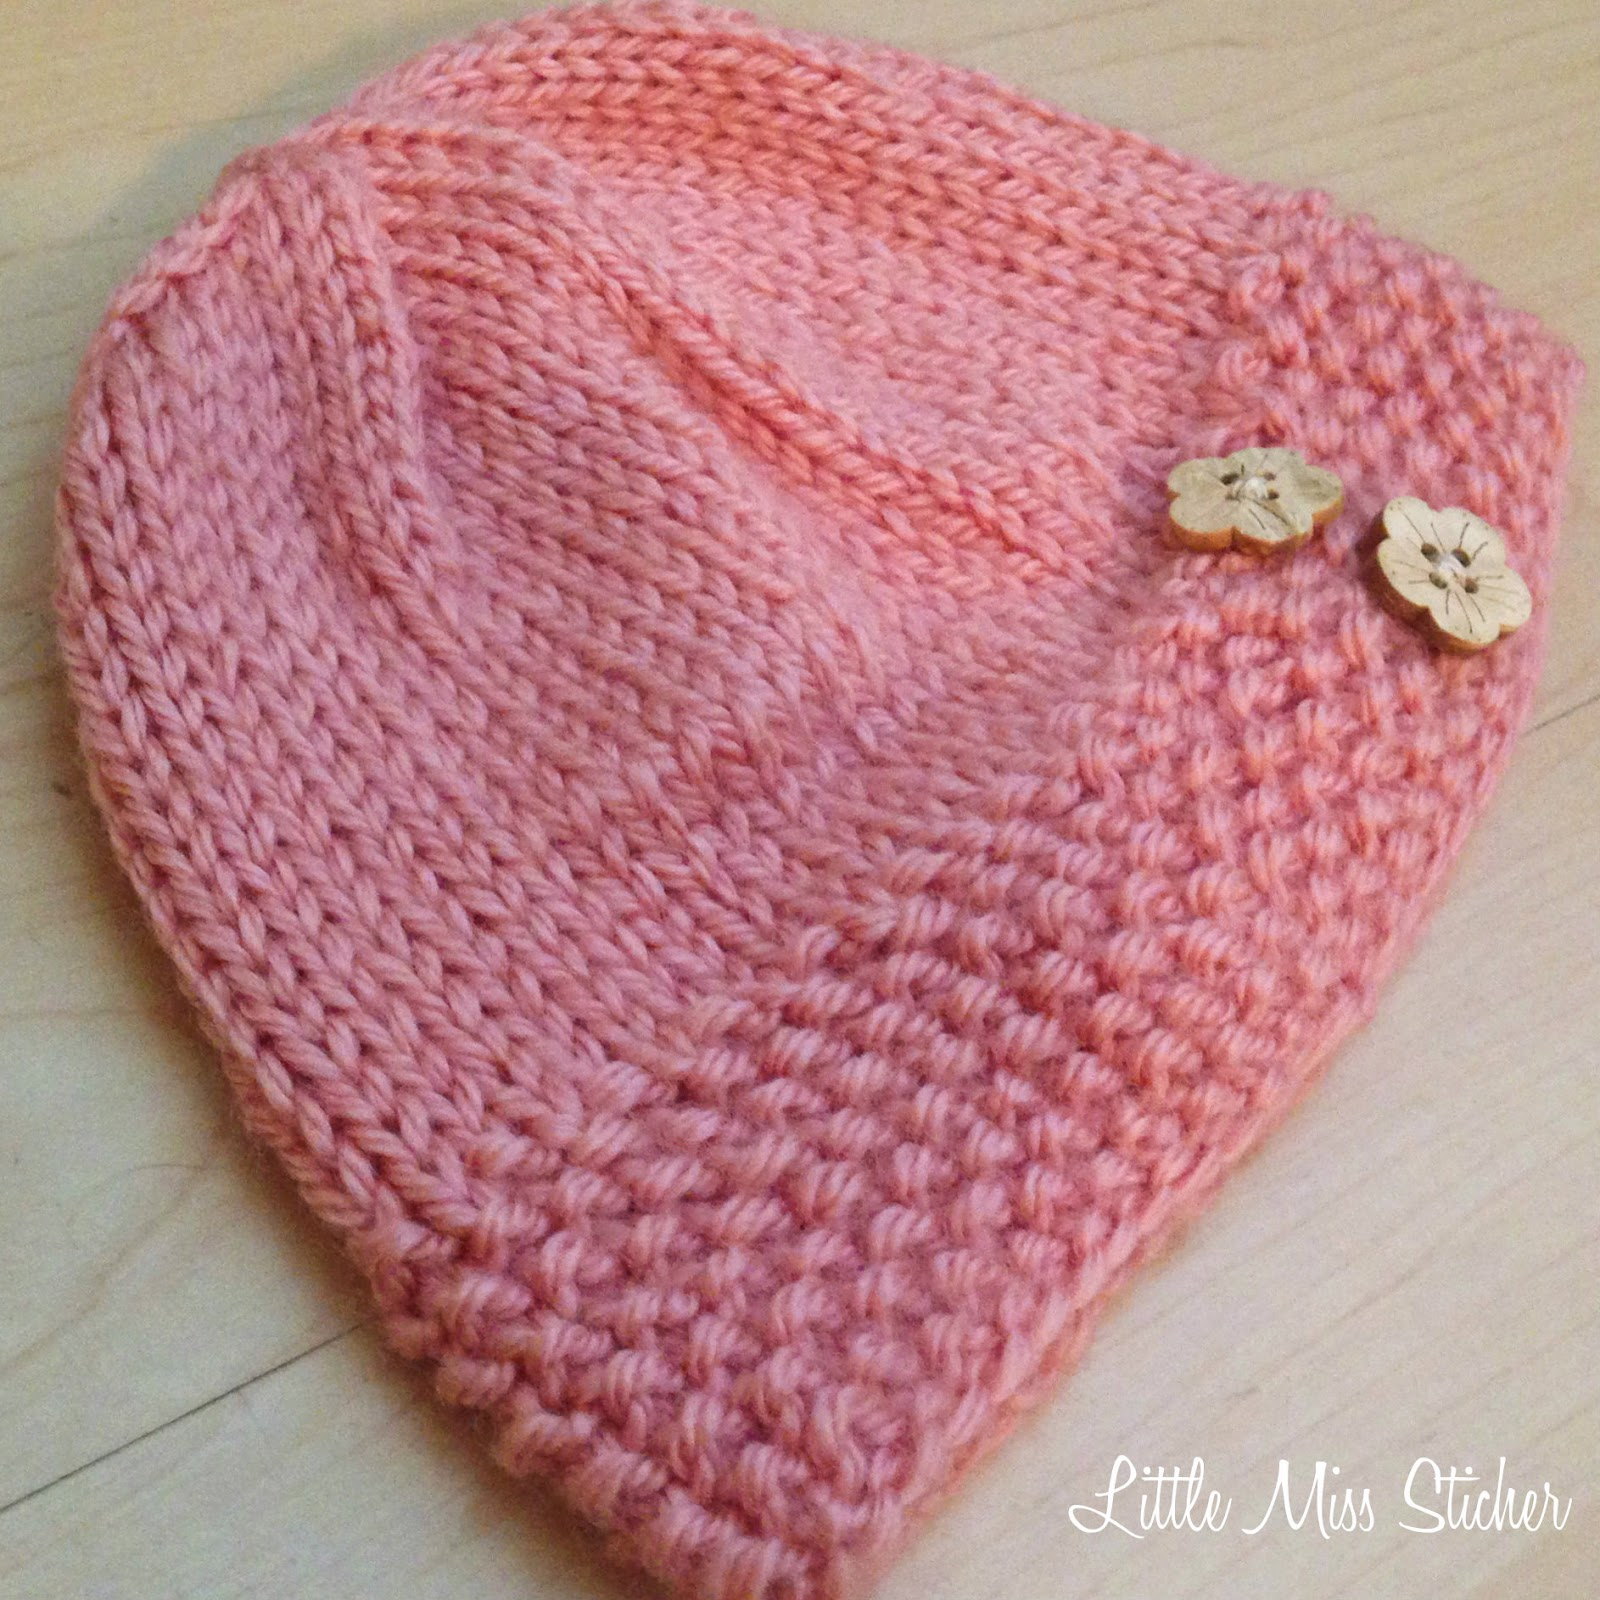 Free Knitting Patterns For Newborn Hats Easy Knitting Patterns For Hats Free